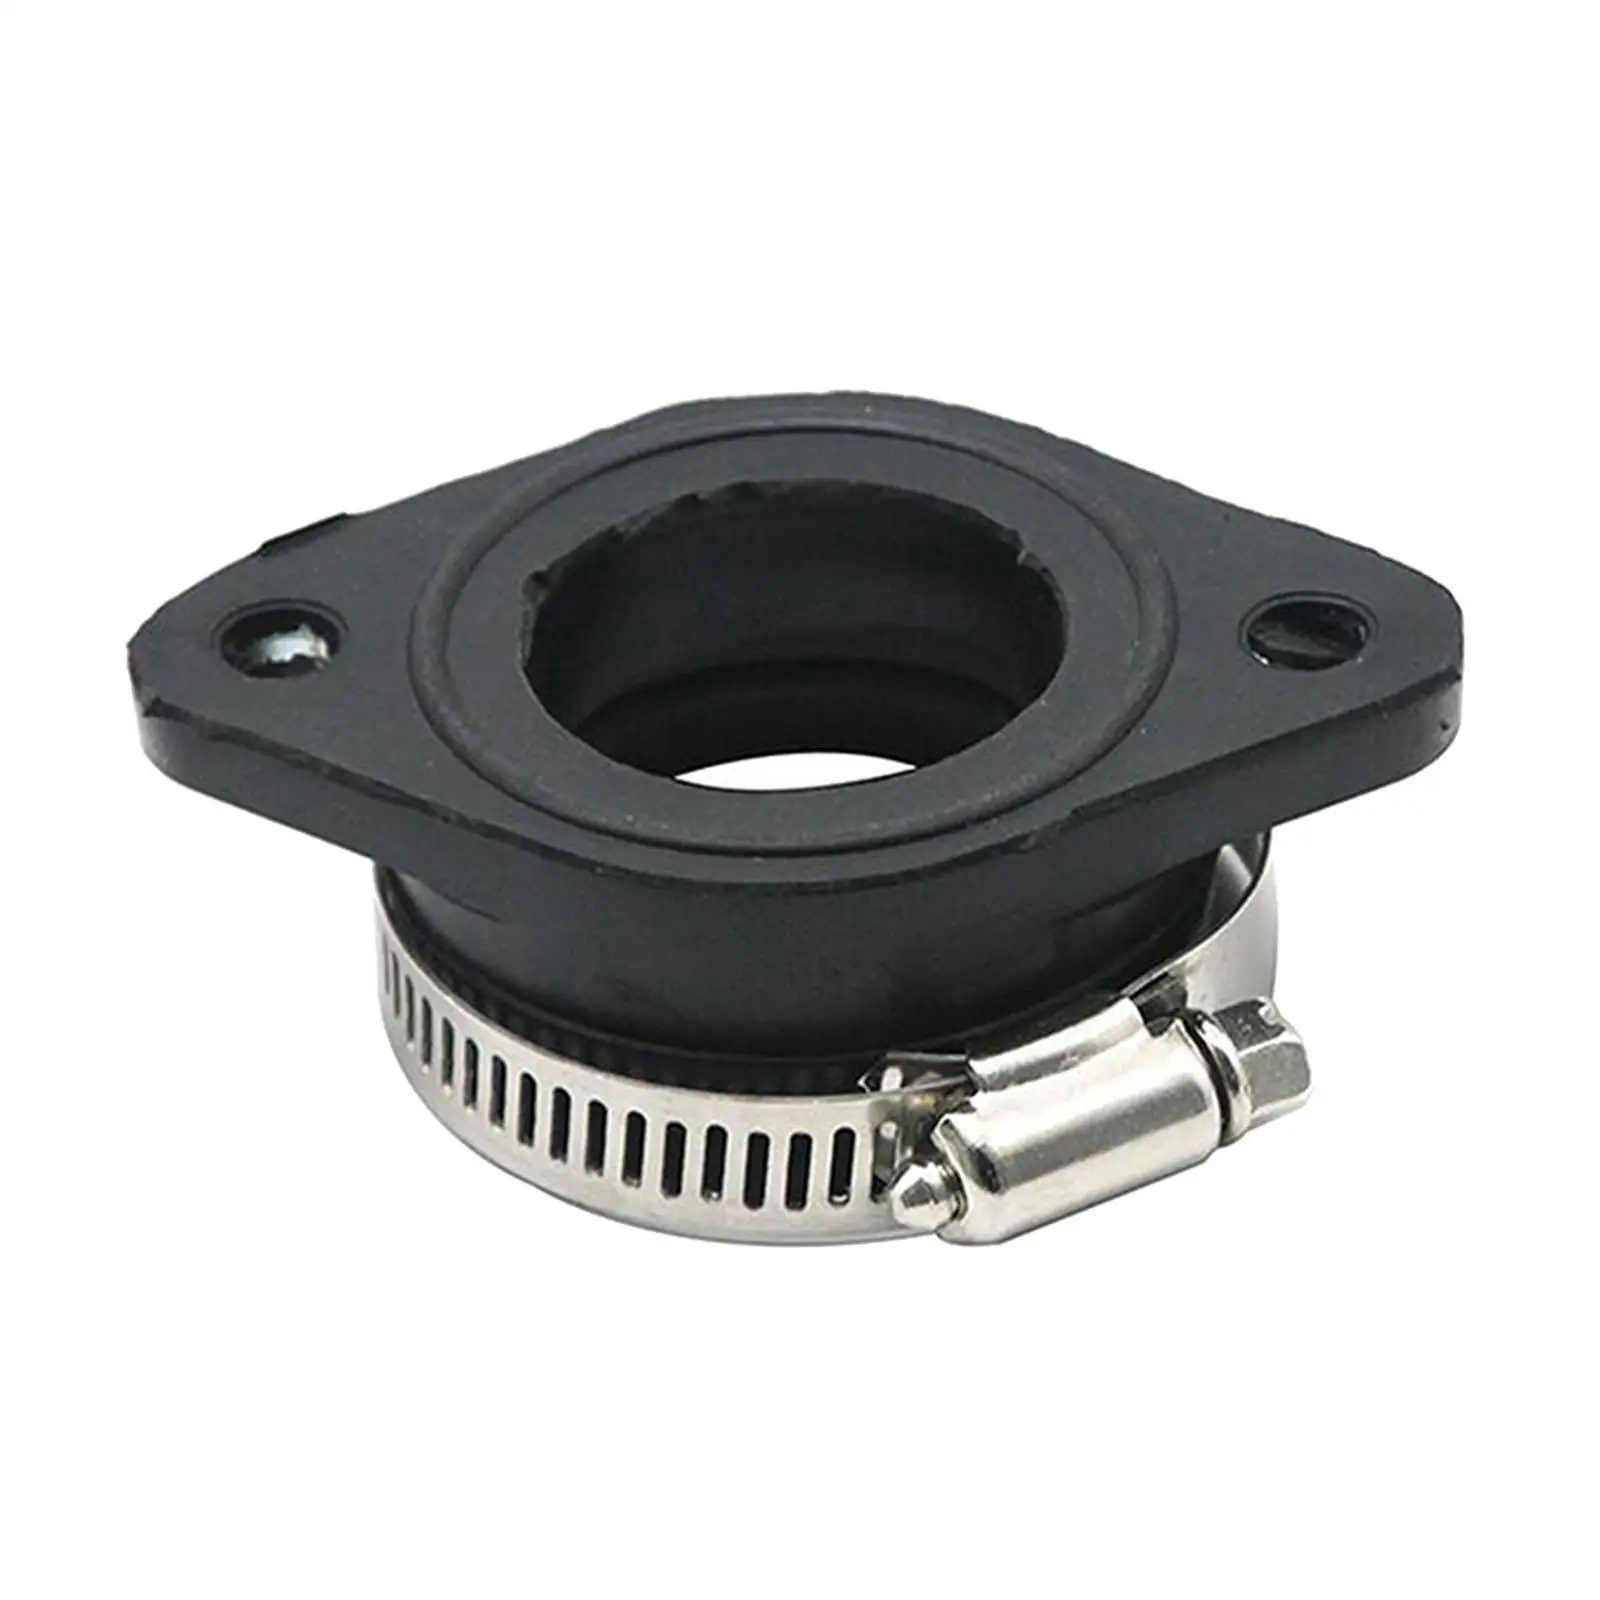 

Carburetor Intake Adapter Boot Joint, Carb Manifold Rubber Intake Manifold Engine Connector Fit for 32/34mm Carburetor for Oko